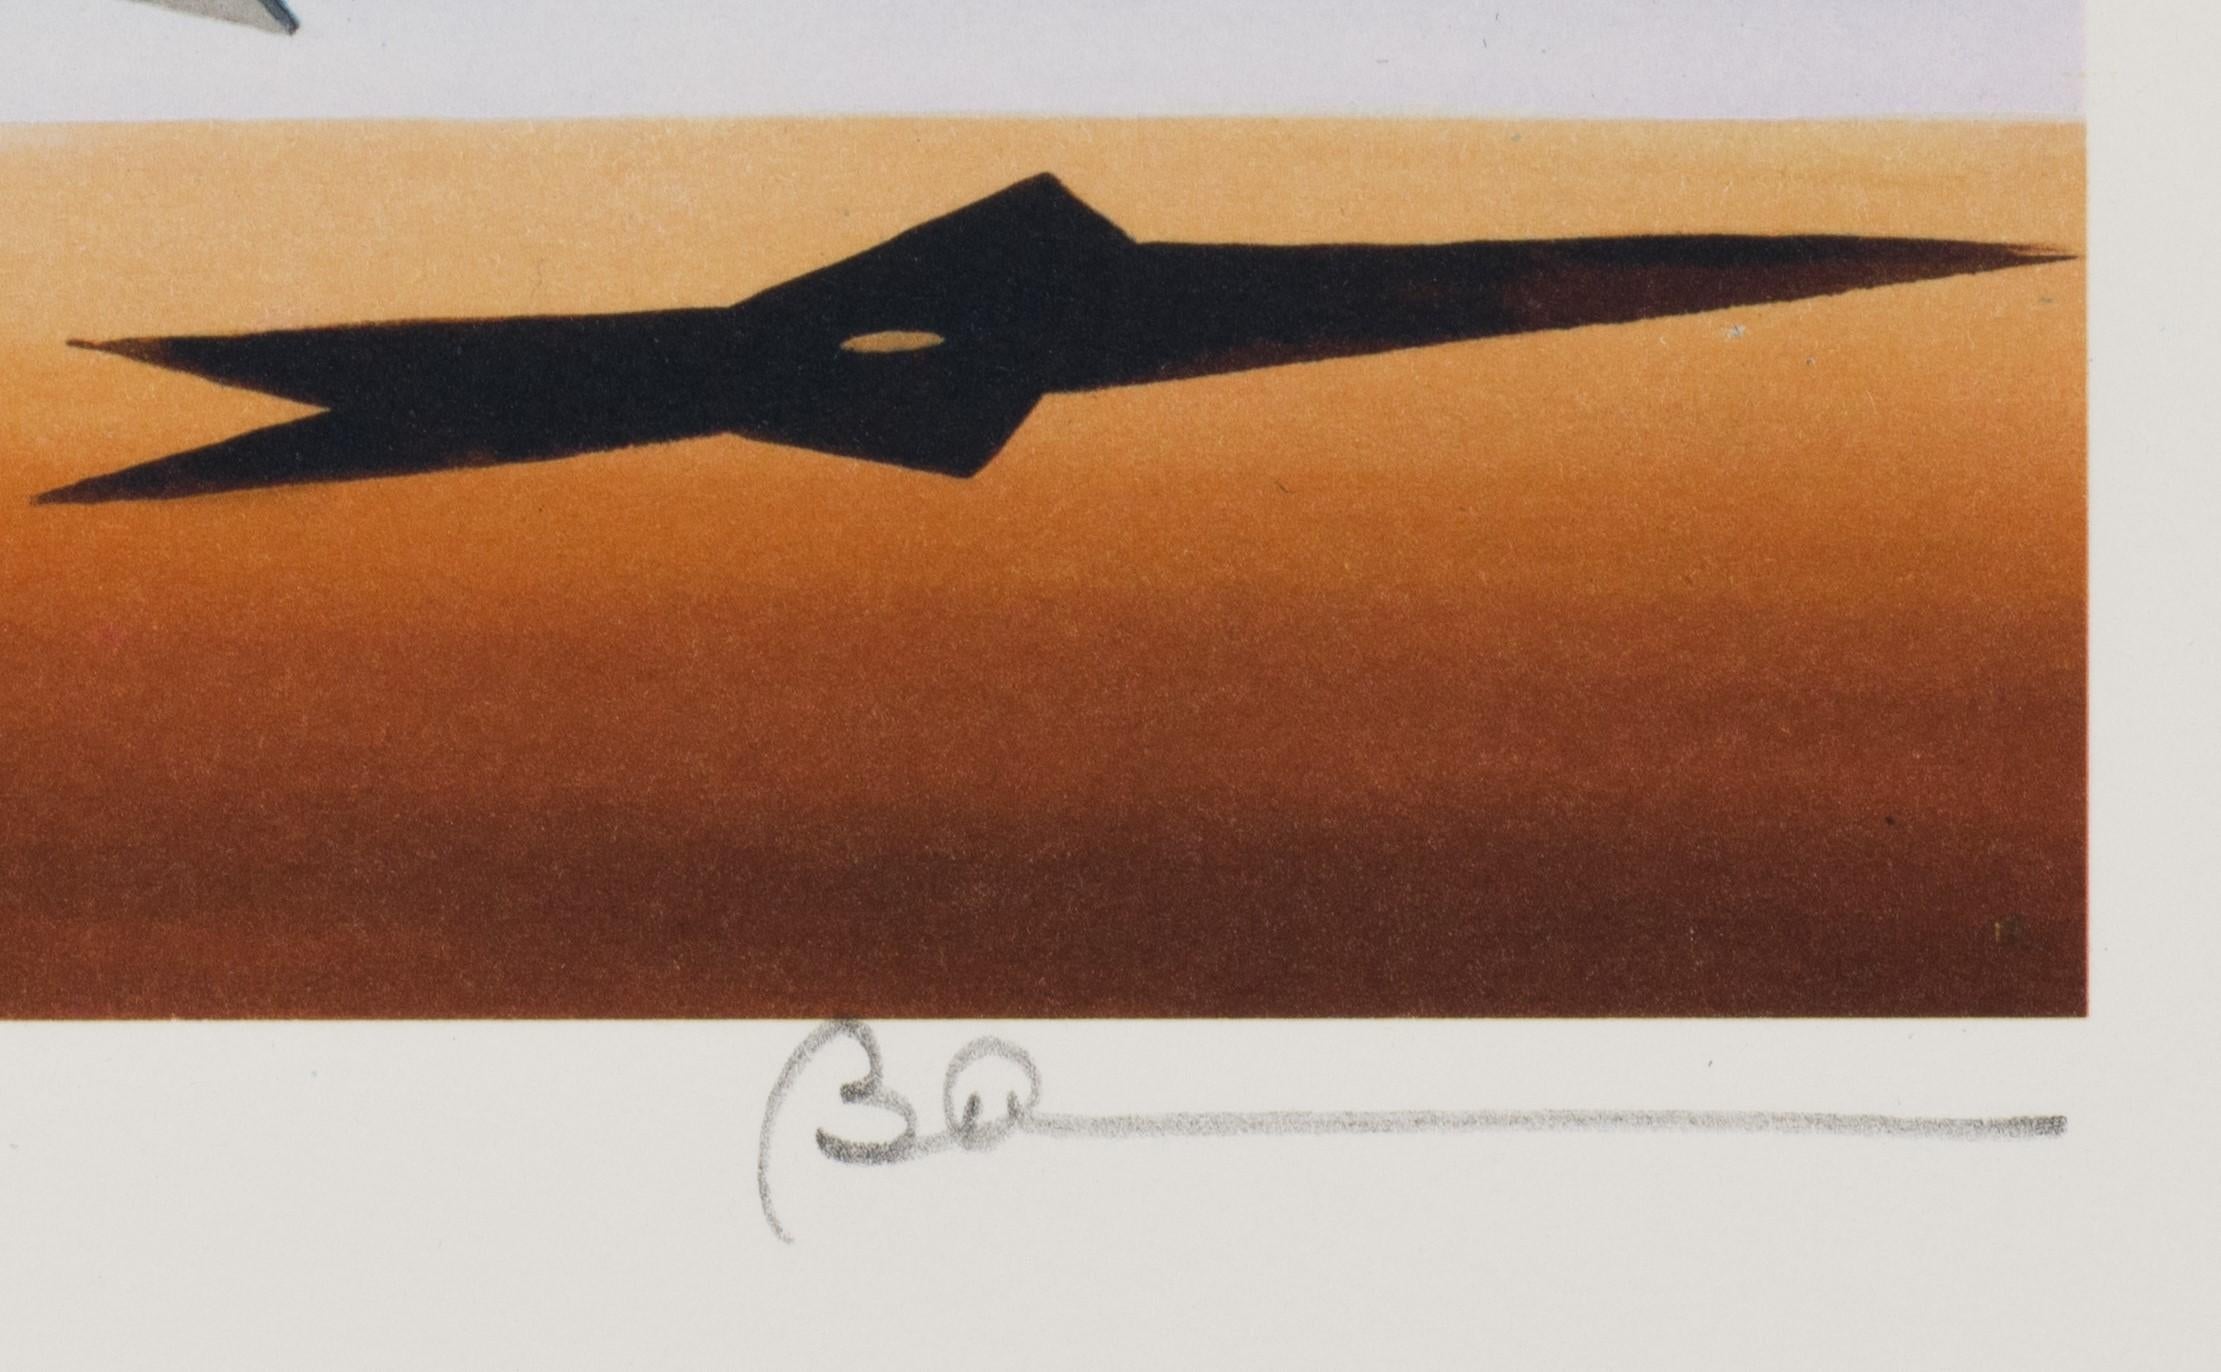 Shooting Stars is a lithograph on paper, 9.5 x 9 inches  image size, and initialed 'BD' lower right. From the edition of 395, numbered LXXV/C (there were also 275 Arabic and 20 AP). Framed in a contemporary, silver-tone frame.

Robert Deyber’s